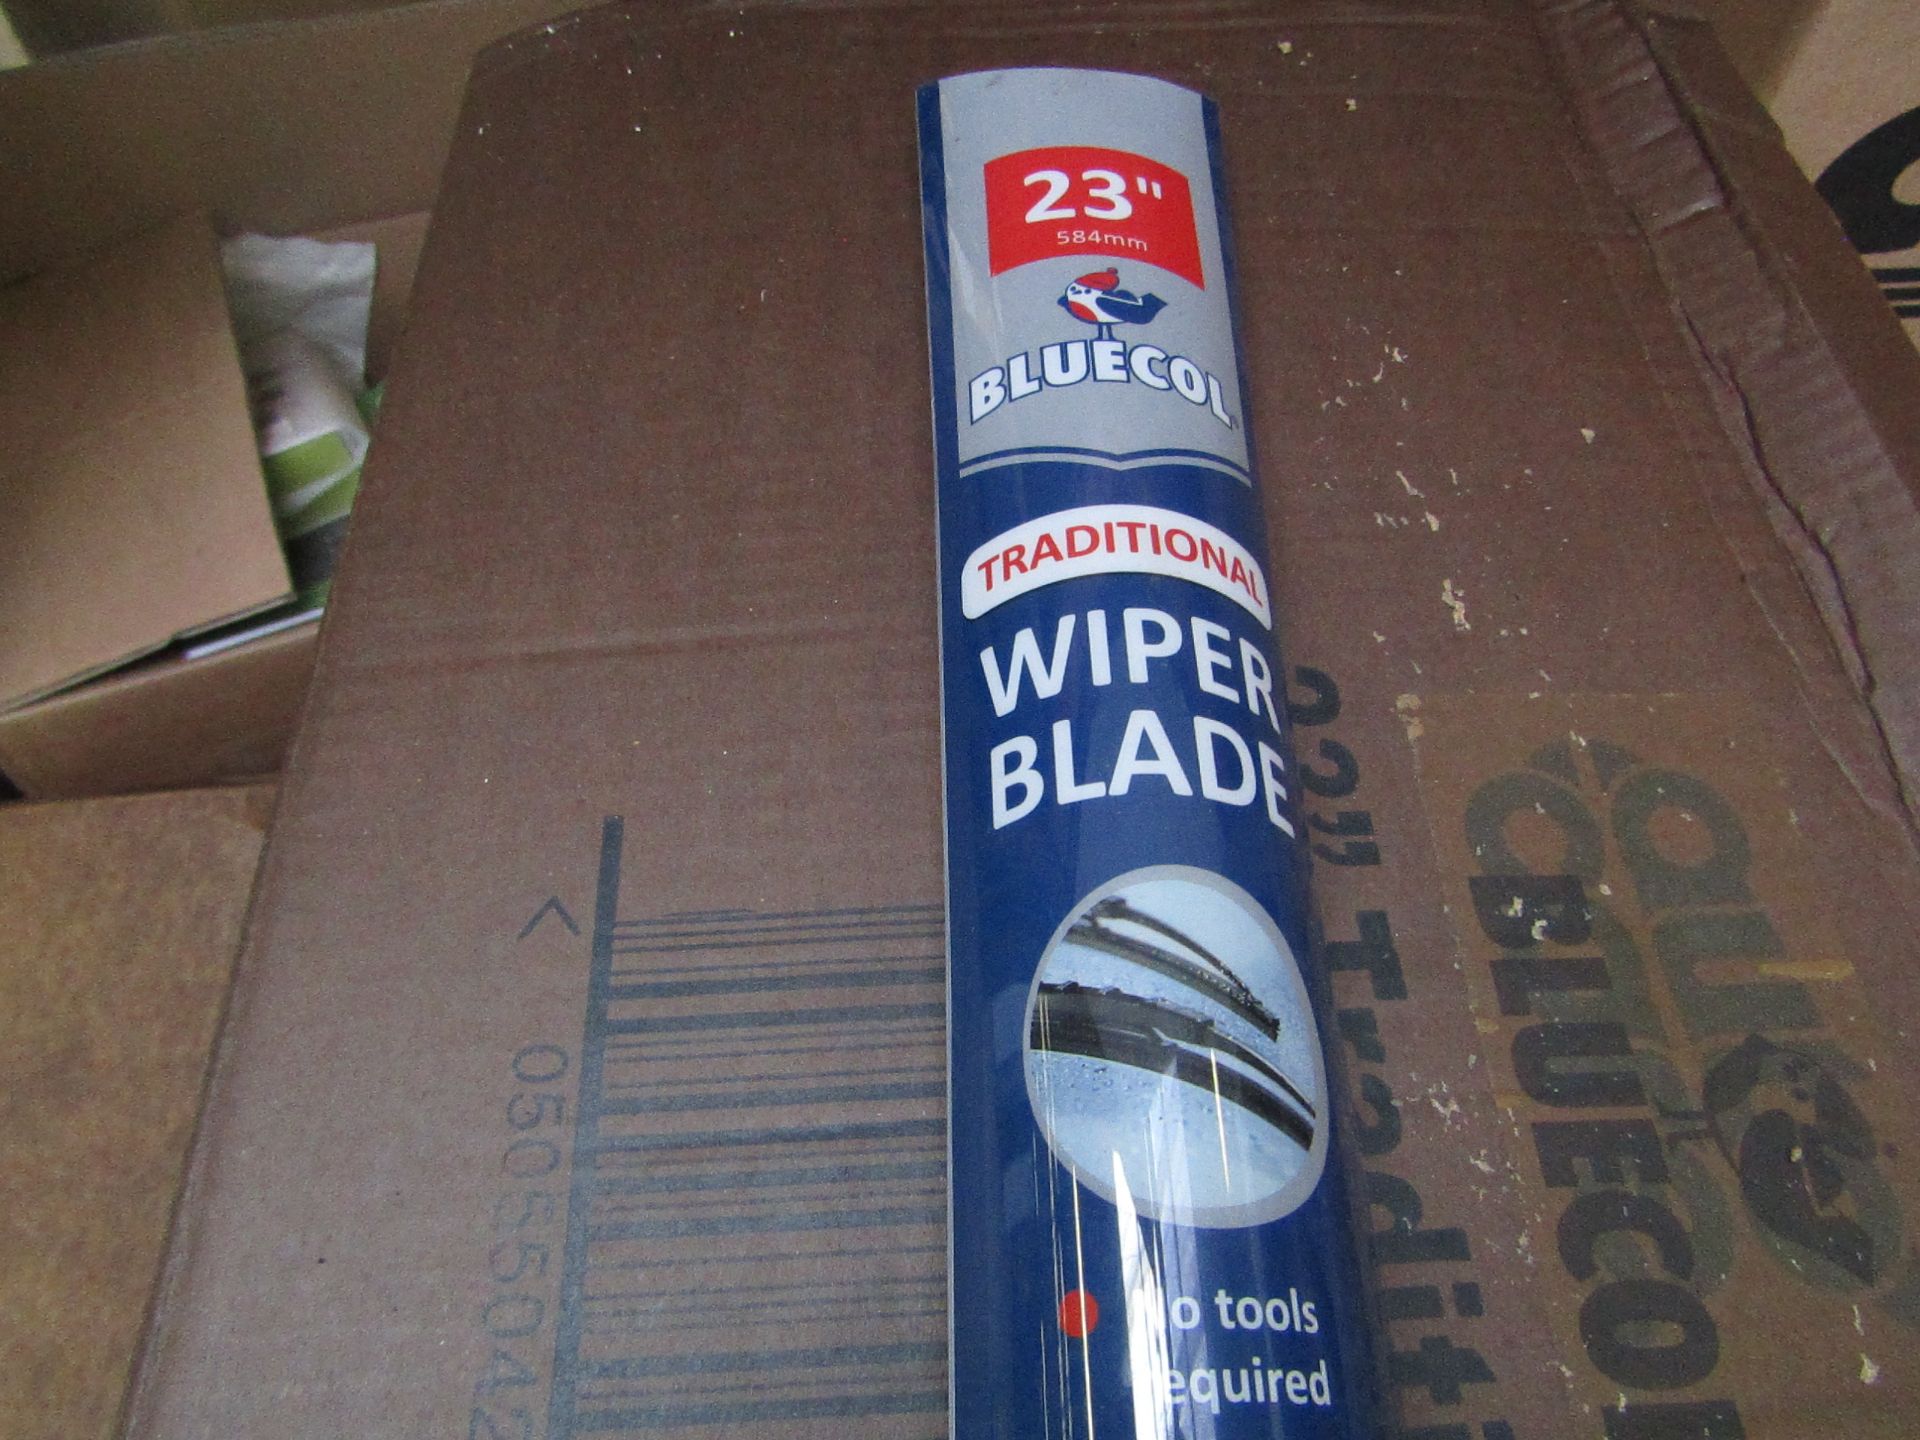 10x Bluecol - 23" Traditional Wiper Blade - Unused & Packaged & Boxed.